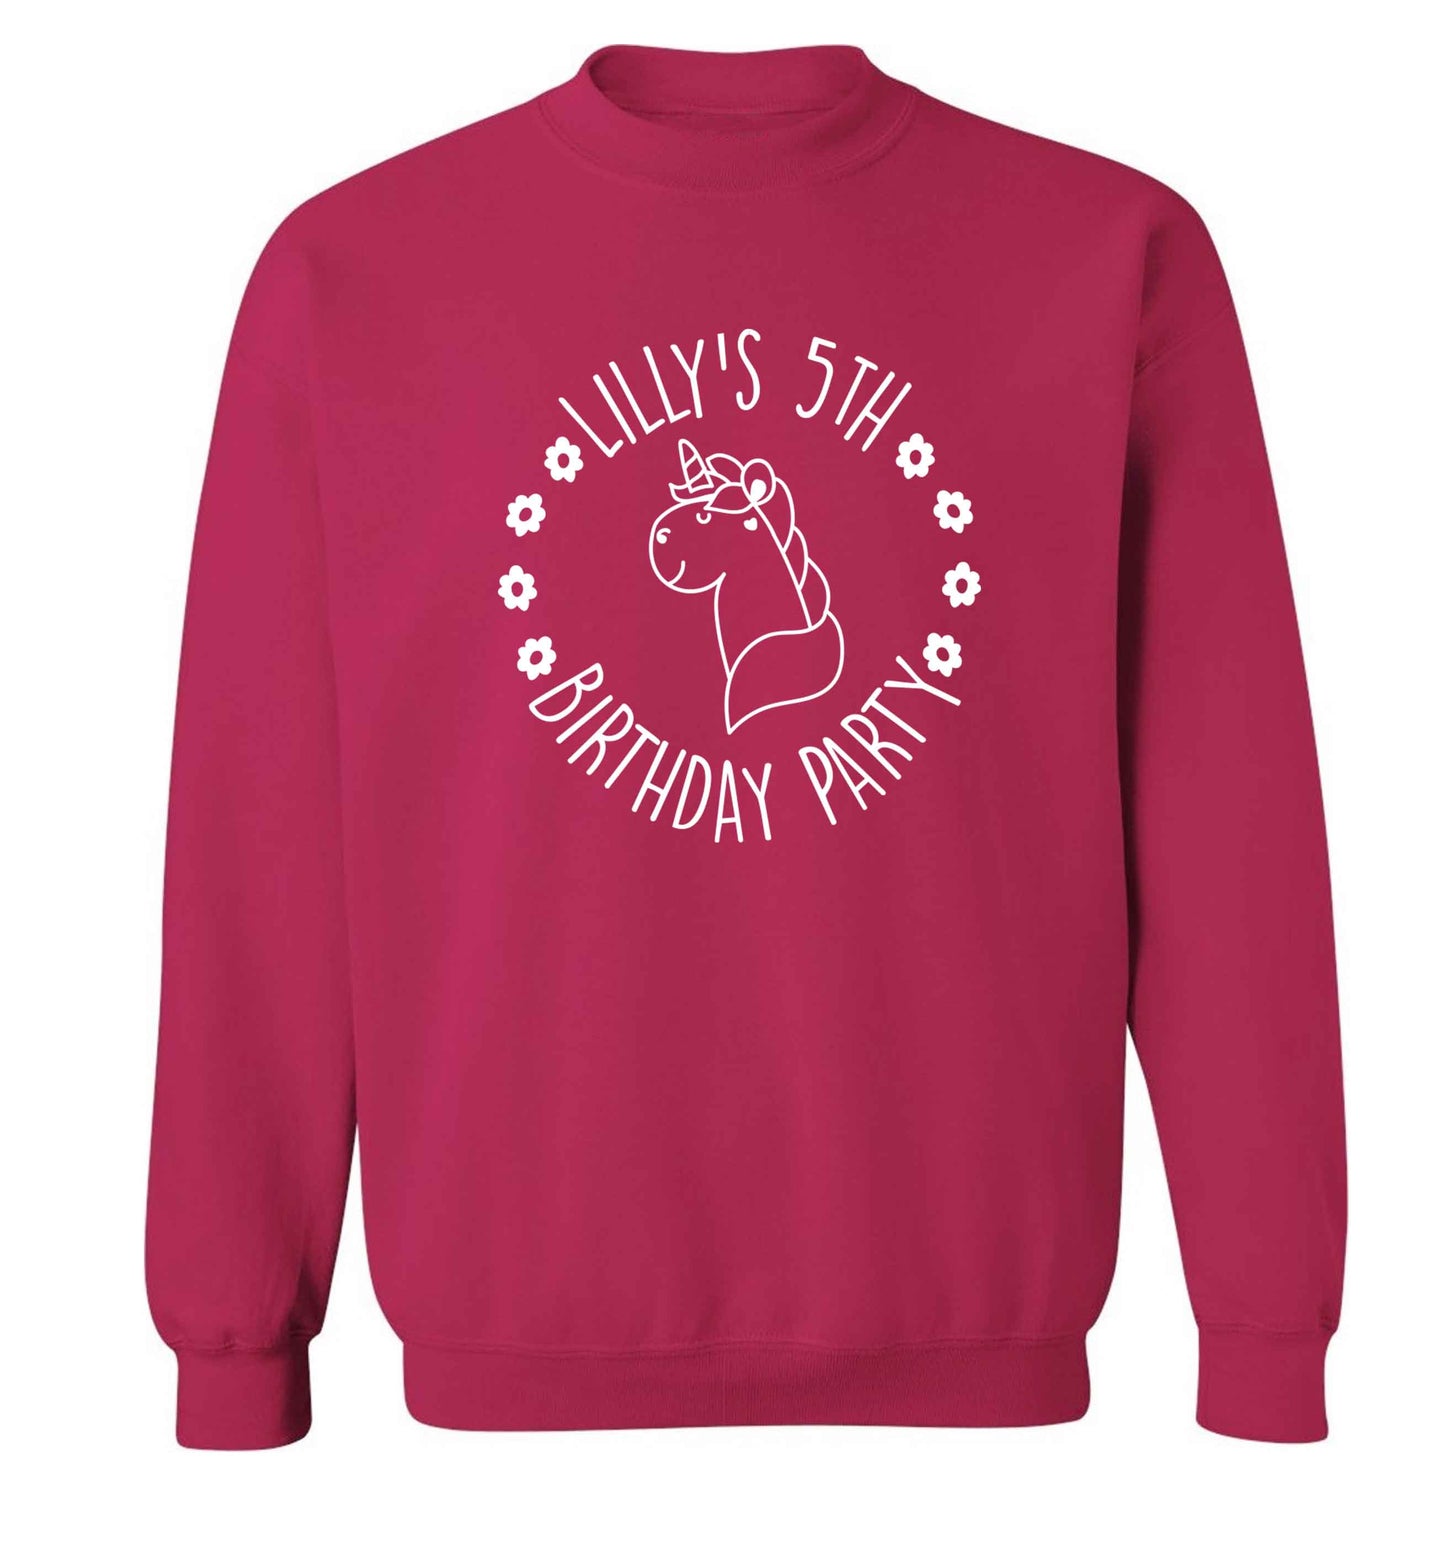 Personalised unicorn birthday party adult's unisex pink sweater 2XL